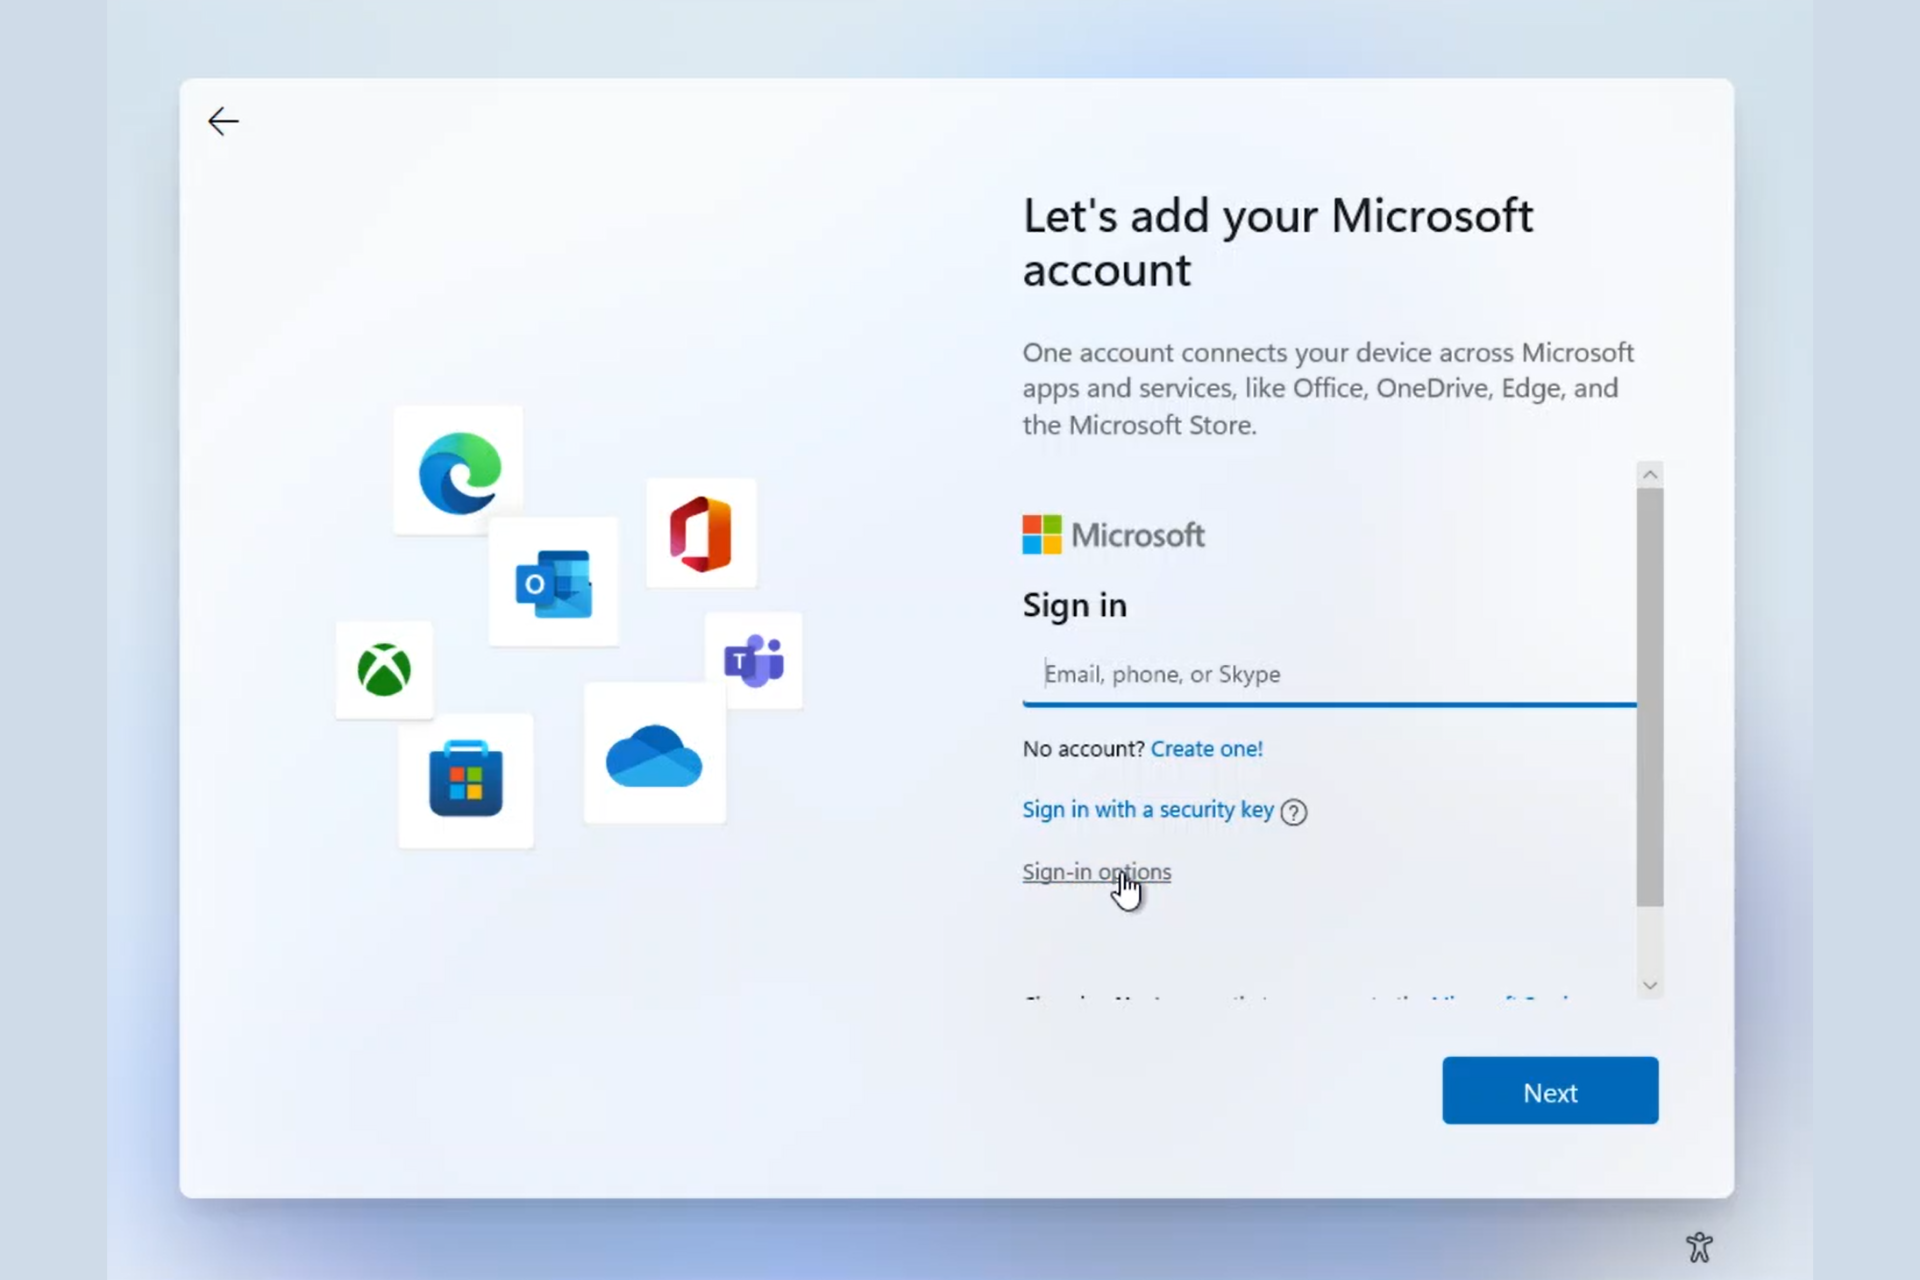 Windows 11 forces you to sign into your Microsoft account to continue the setup